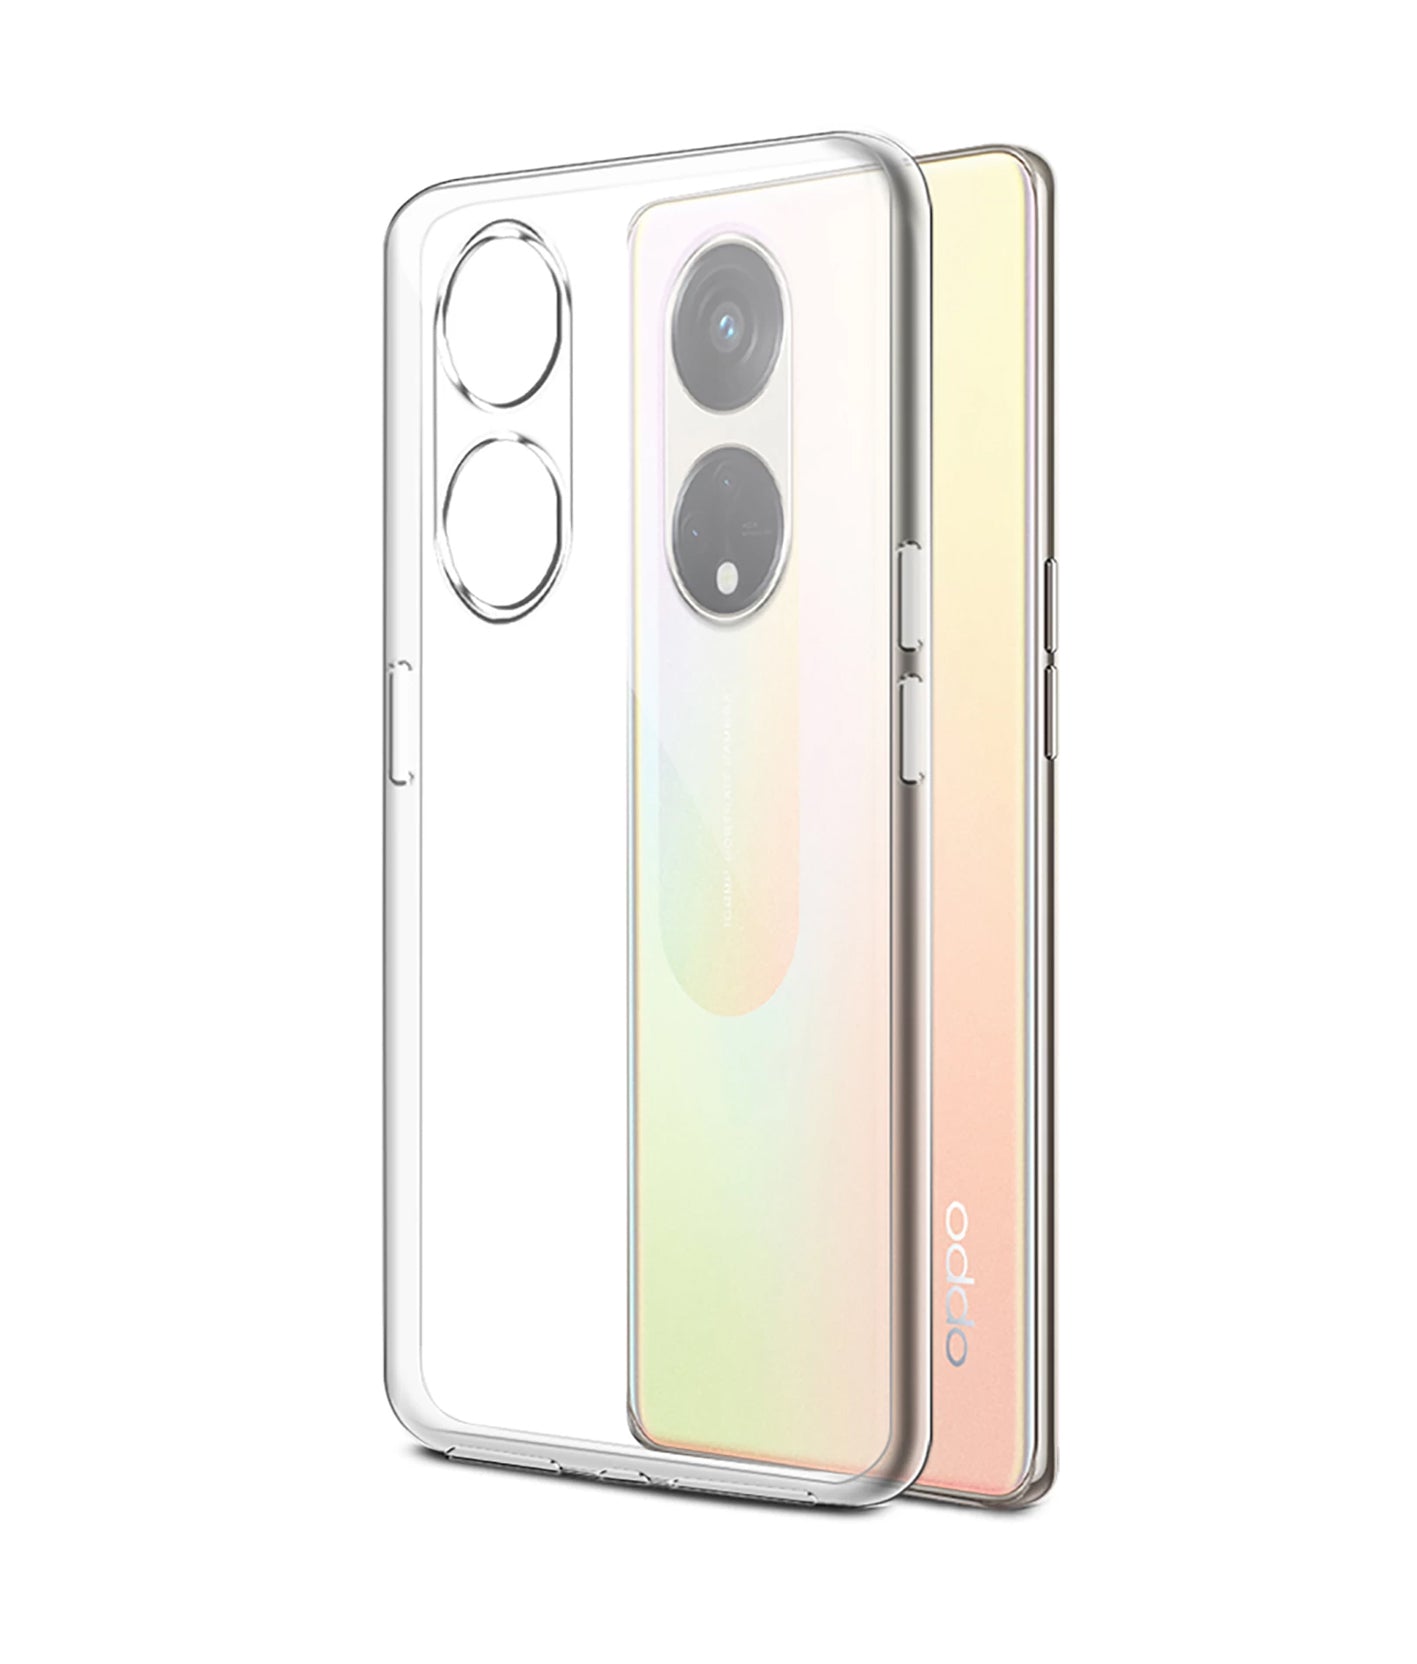 Transparent clear Crystal Phone Case For Oppo/Realme